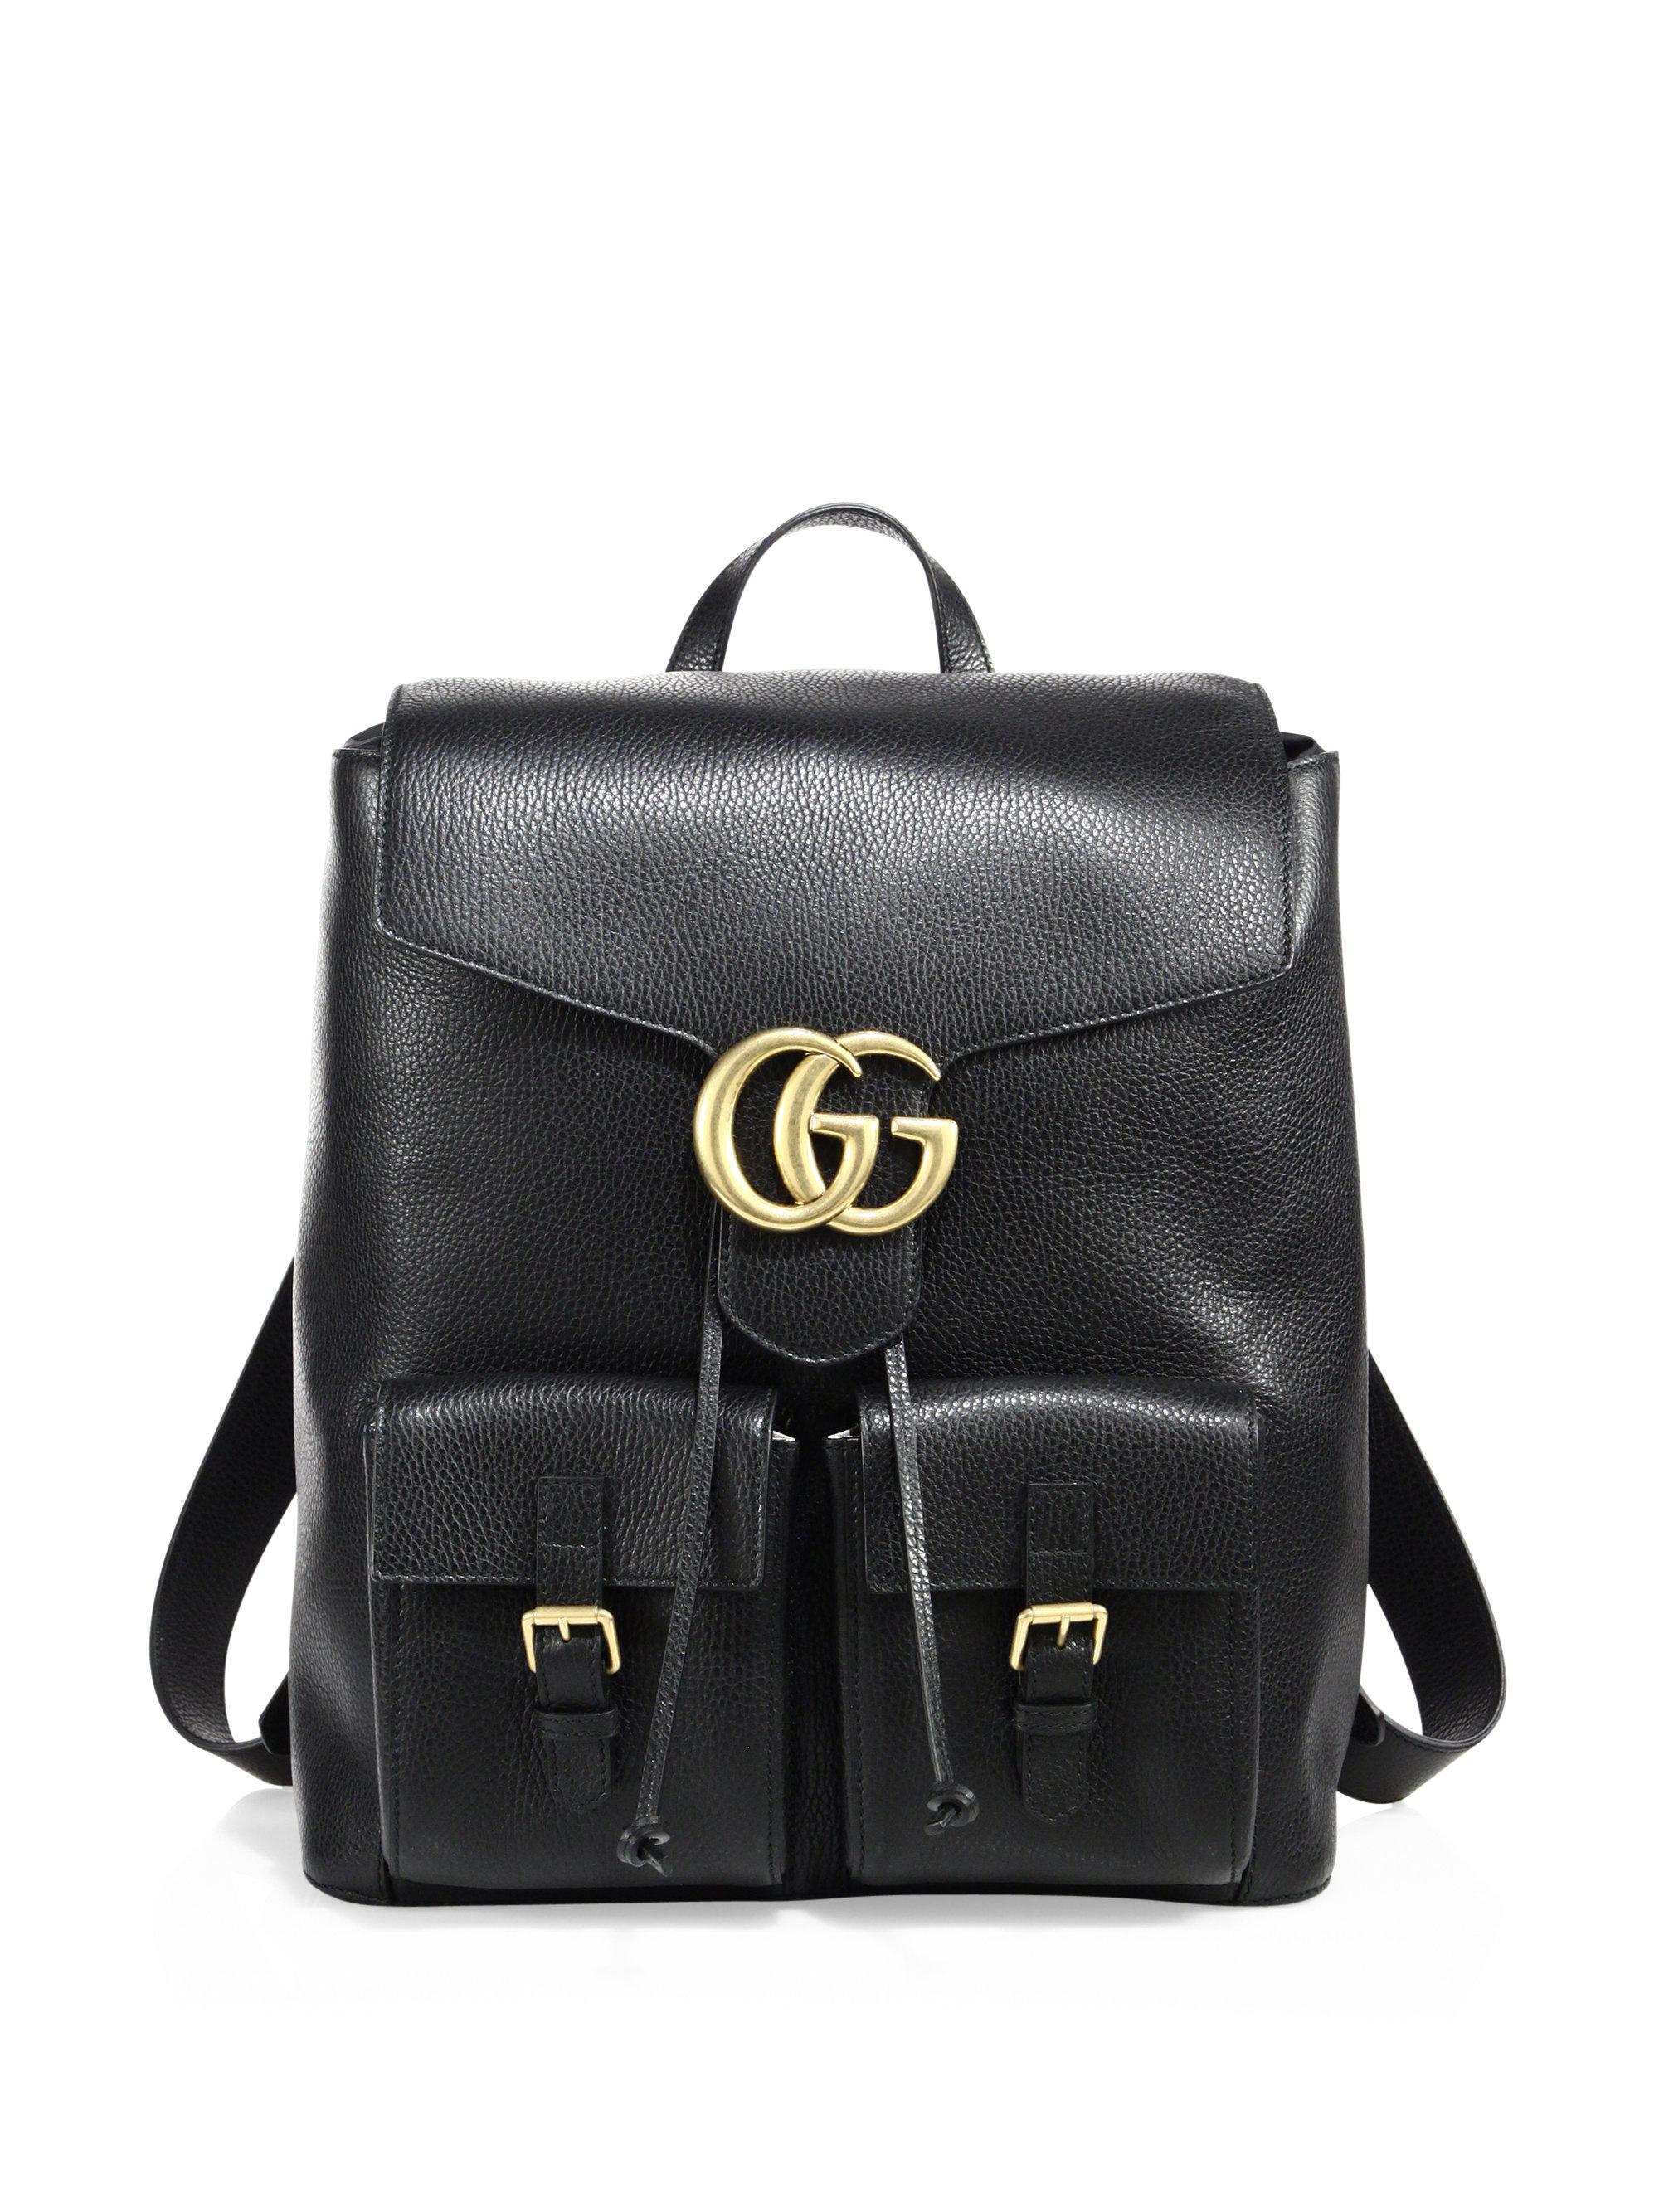 Gucci Leather Gg Marmont Backpack in Black for Men - Lyst